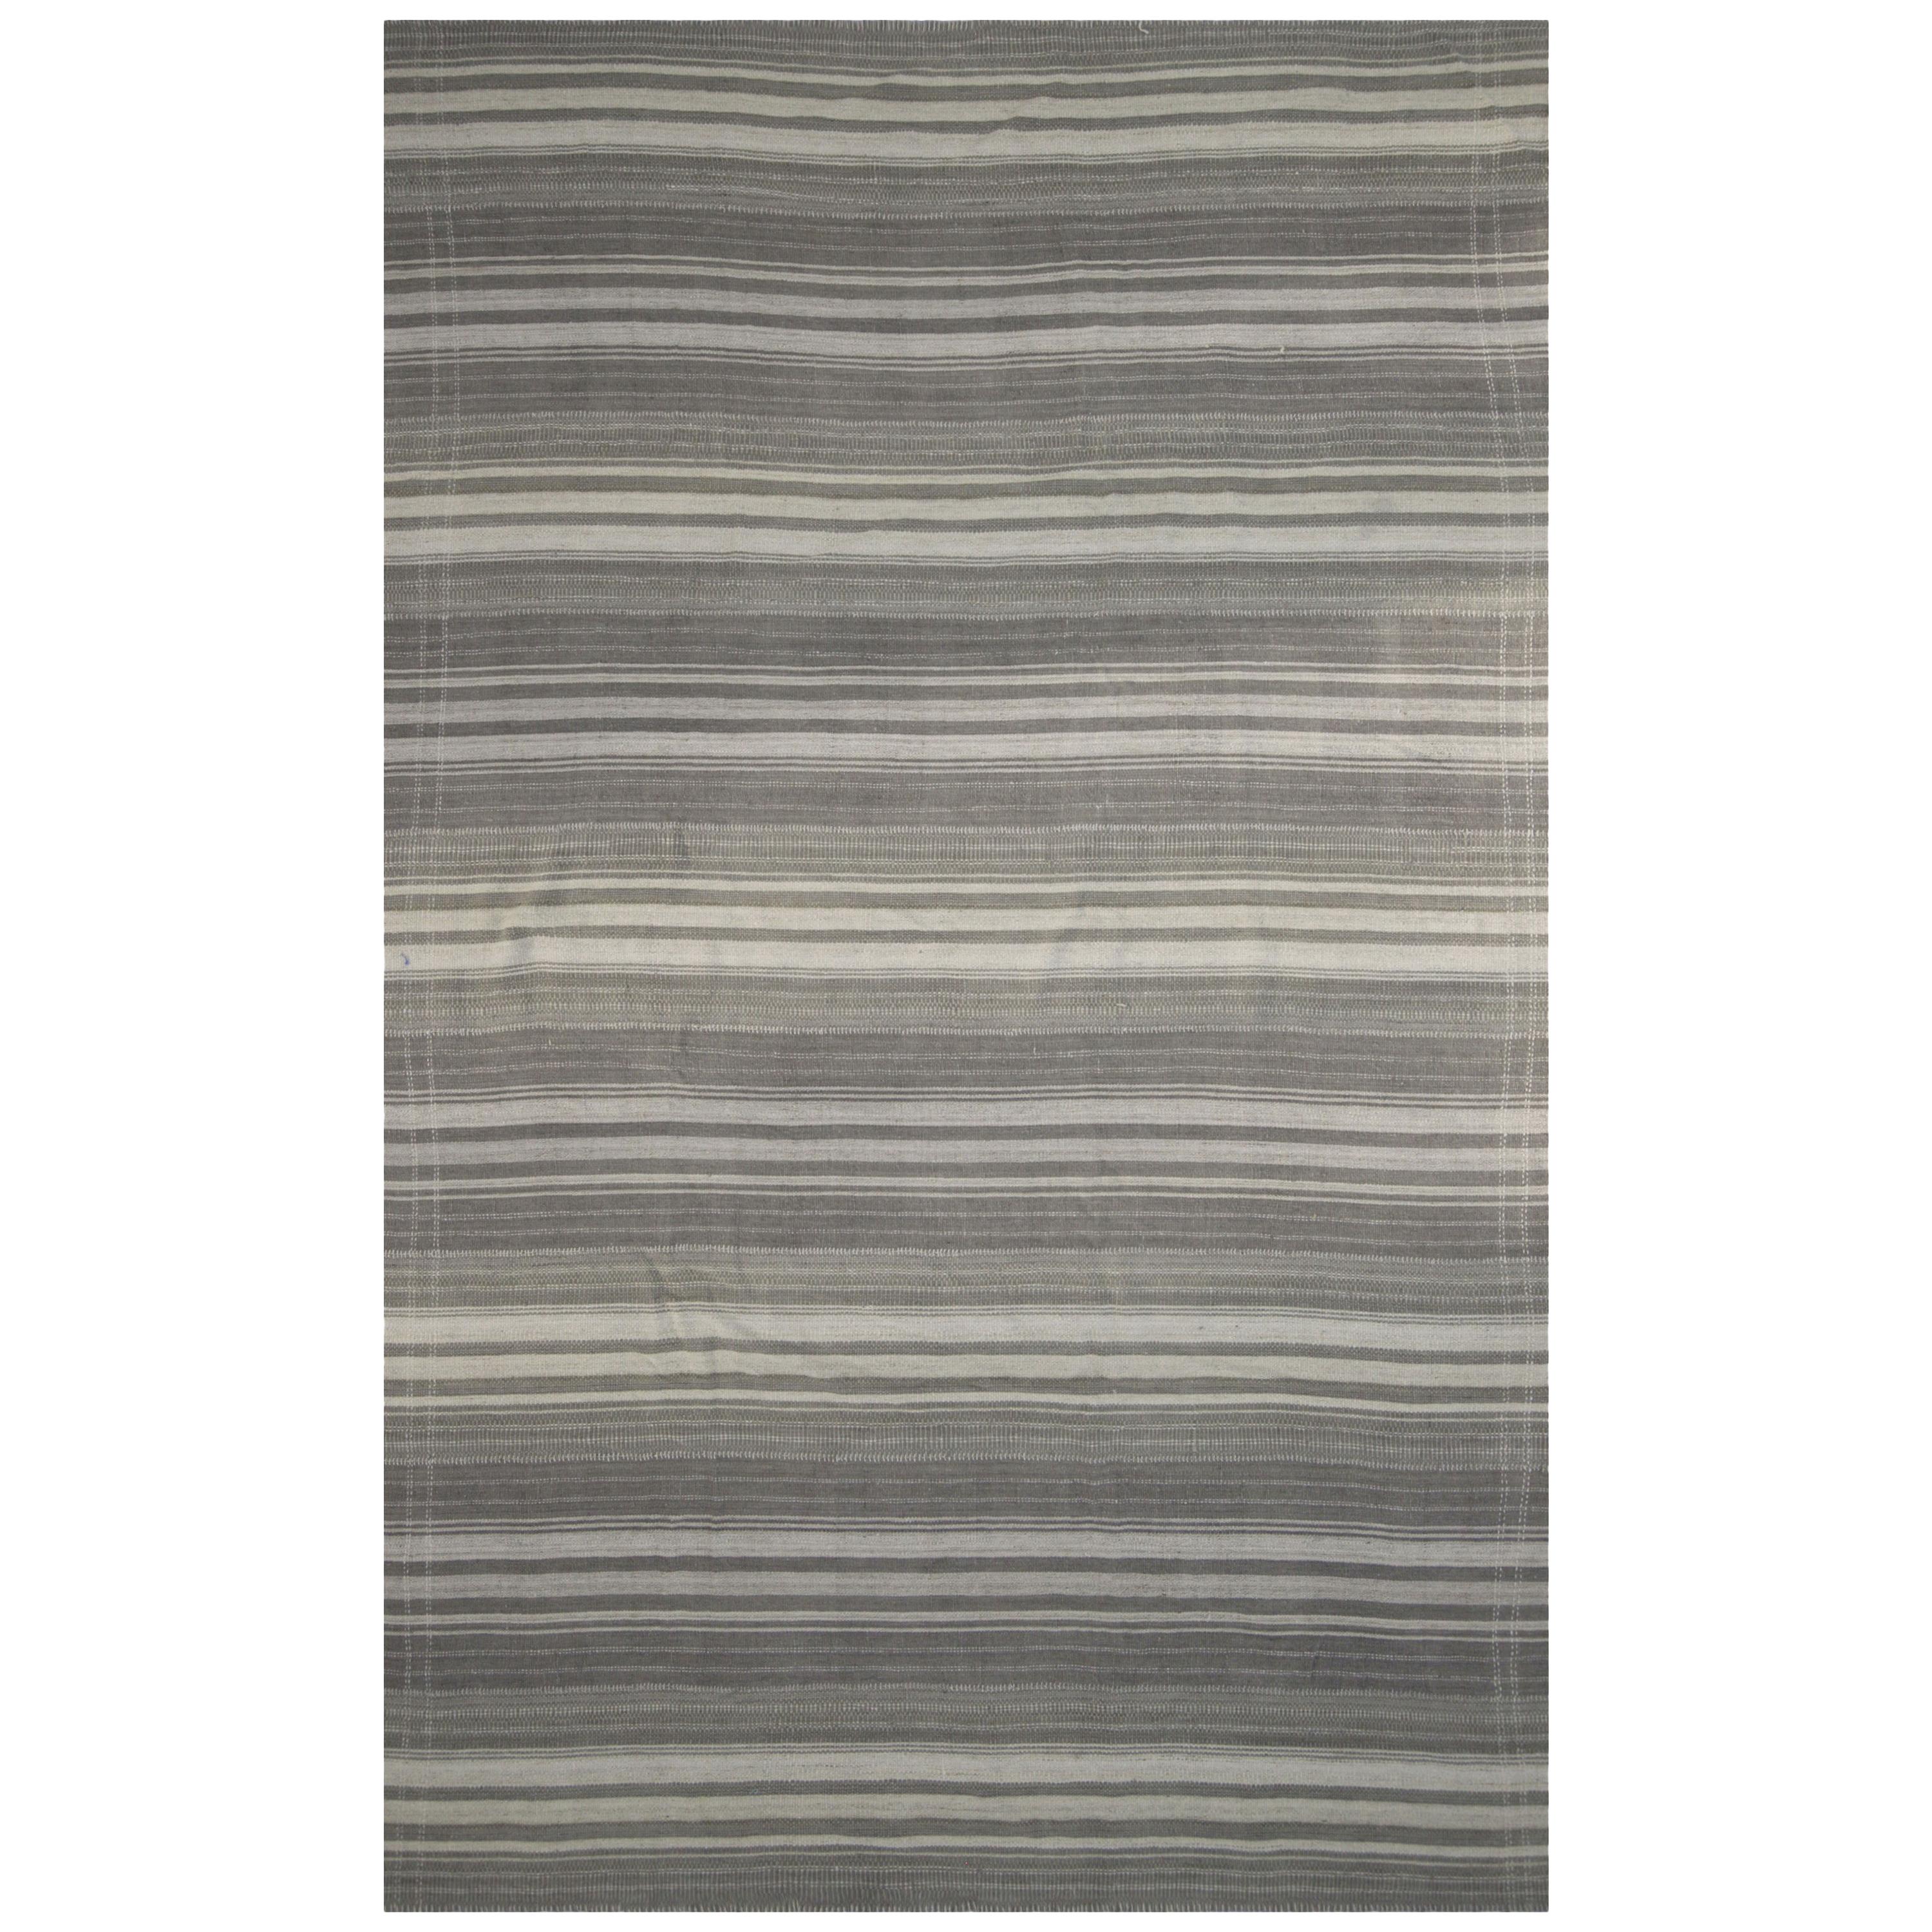 Contemporary Kilim Rug with Ivory and Gray Stripes